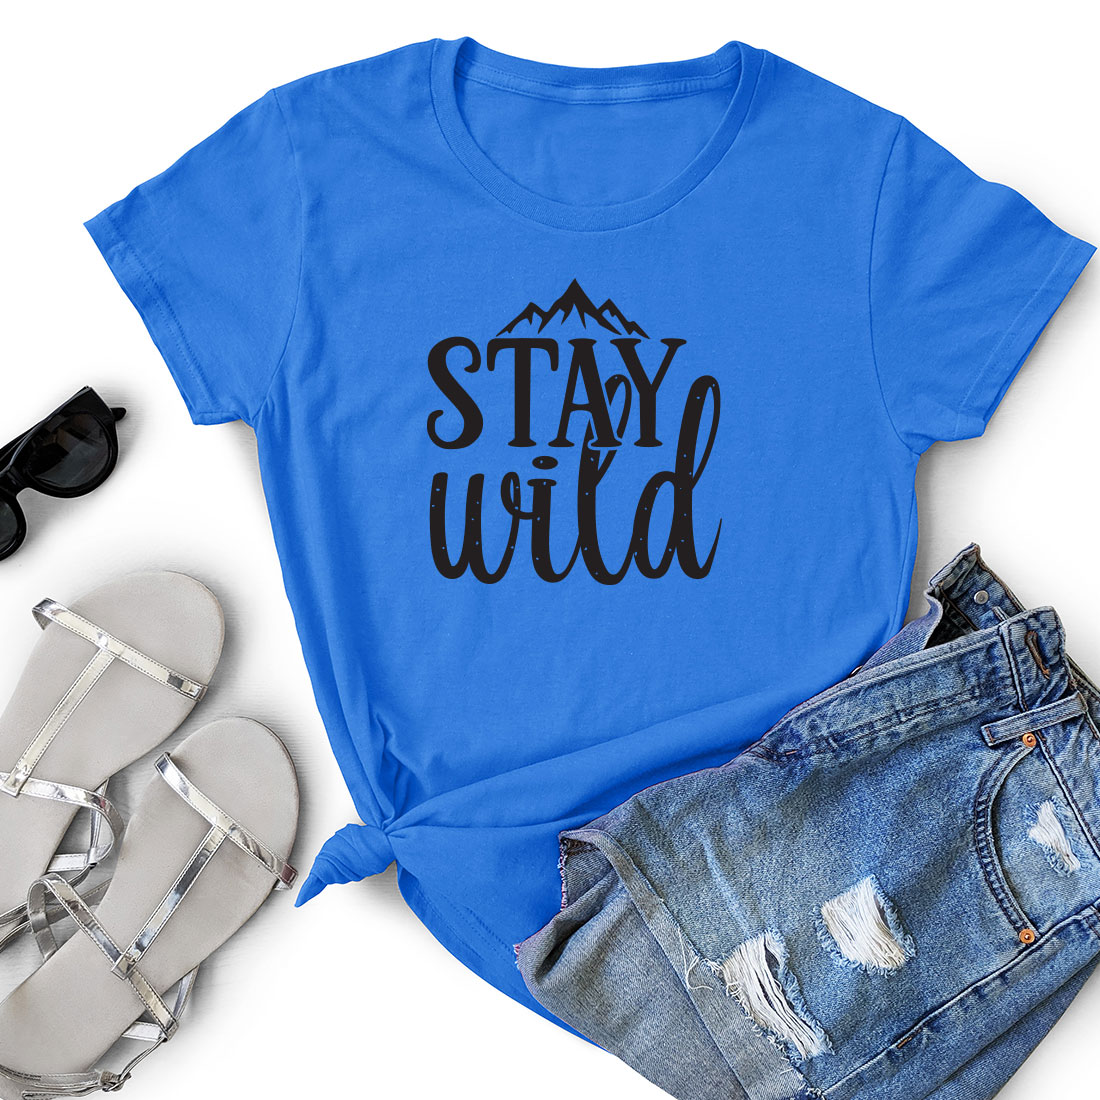 Blue shirt that says stay wild next to a pair of shorts.